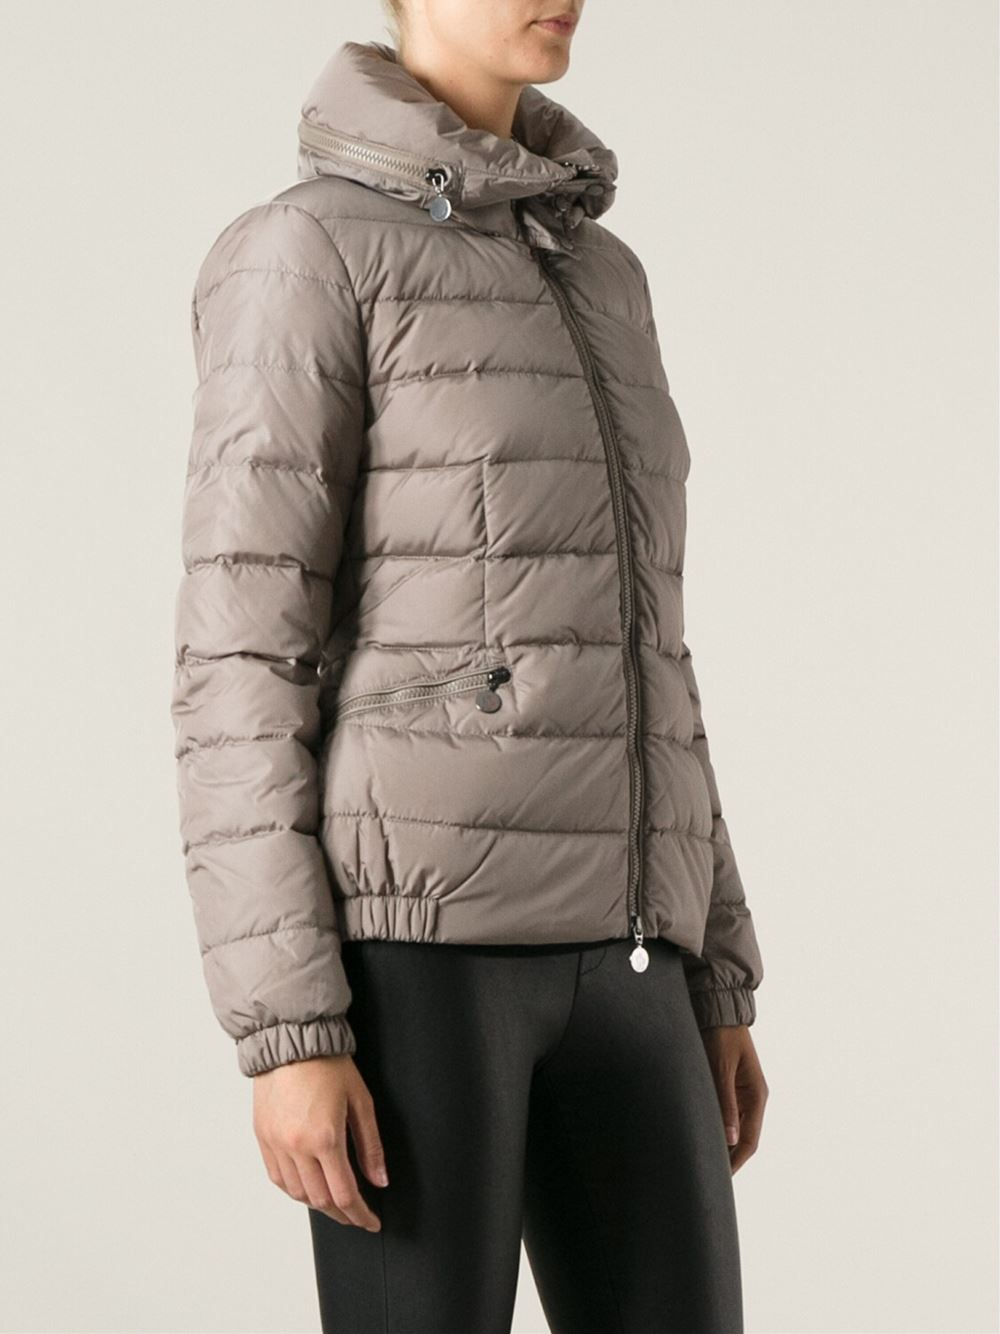 Lyst - Moncler Sanglier Padded Jacket in Natural